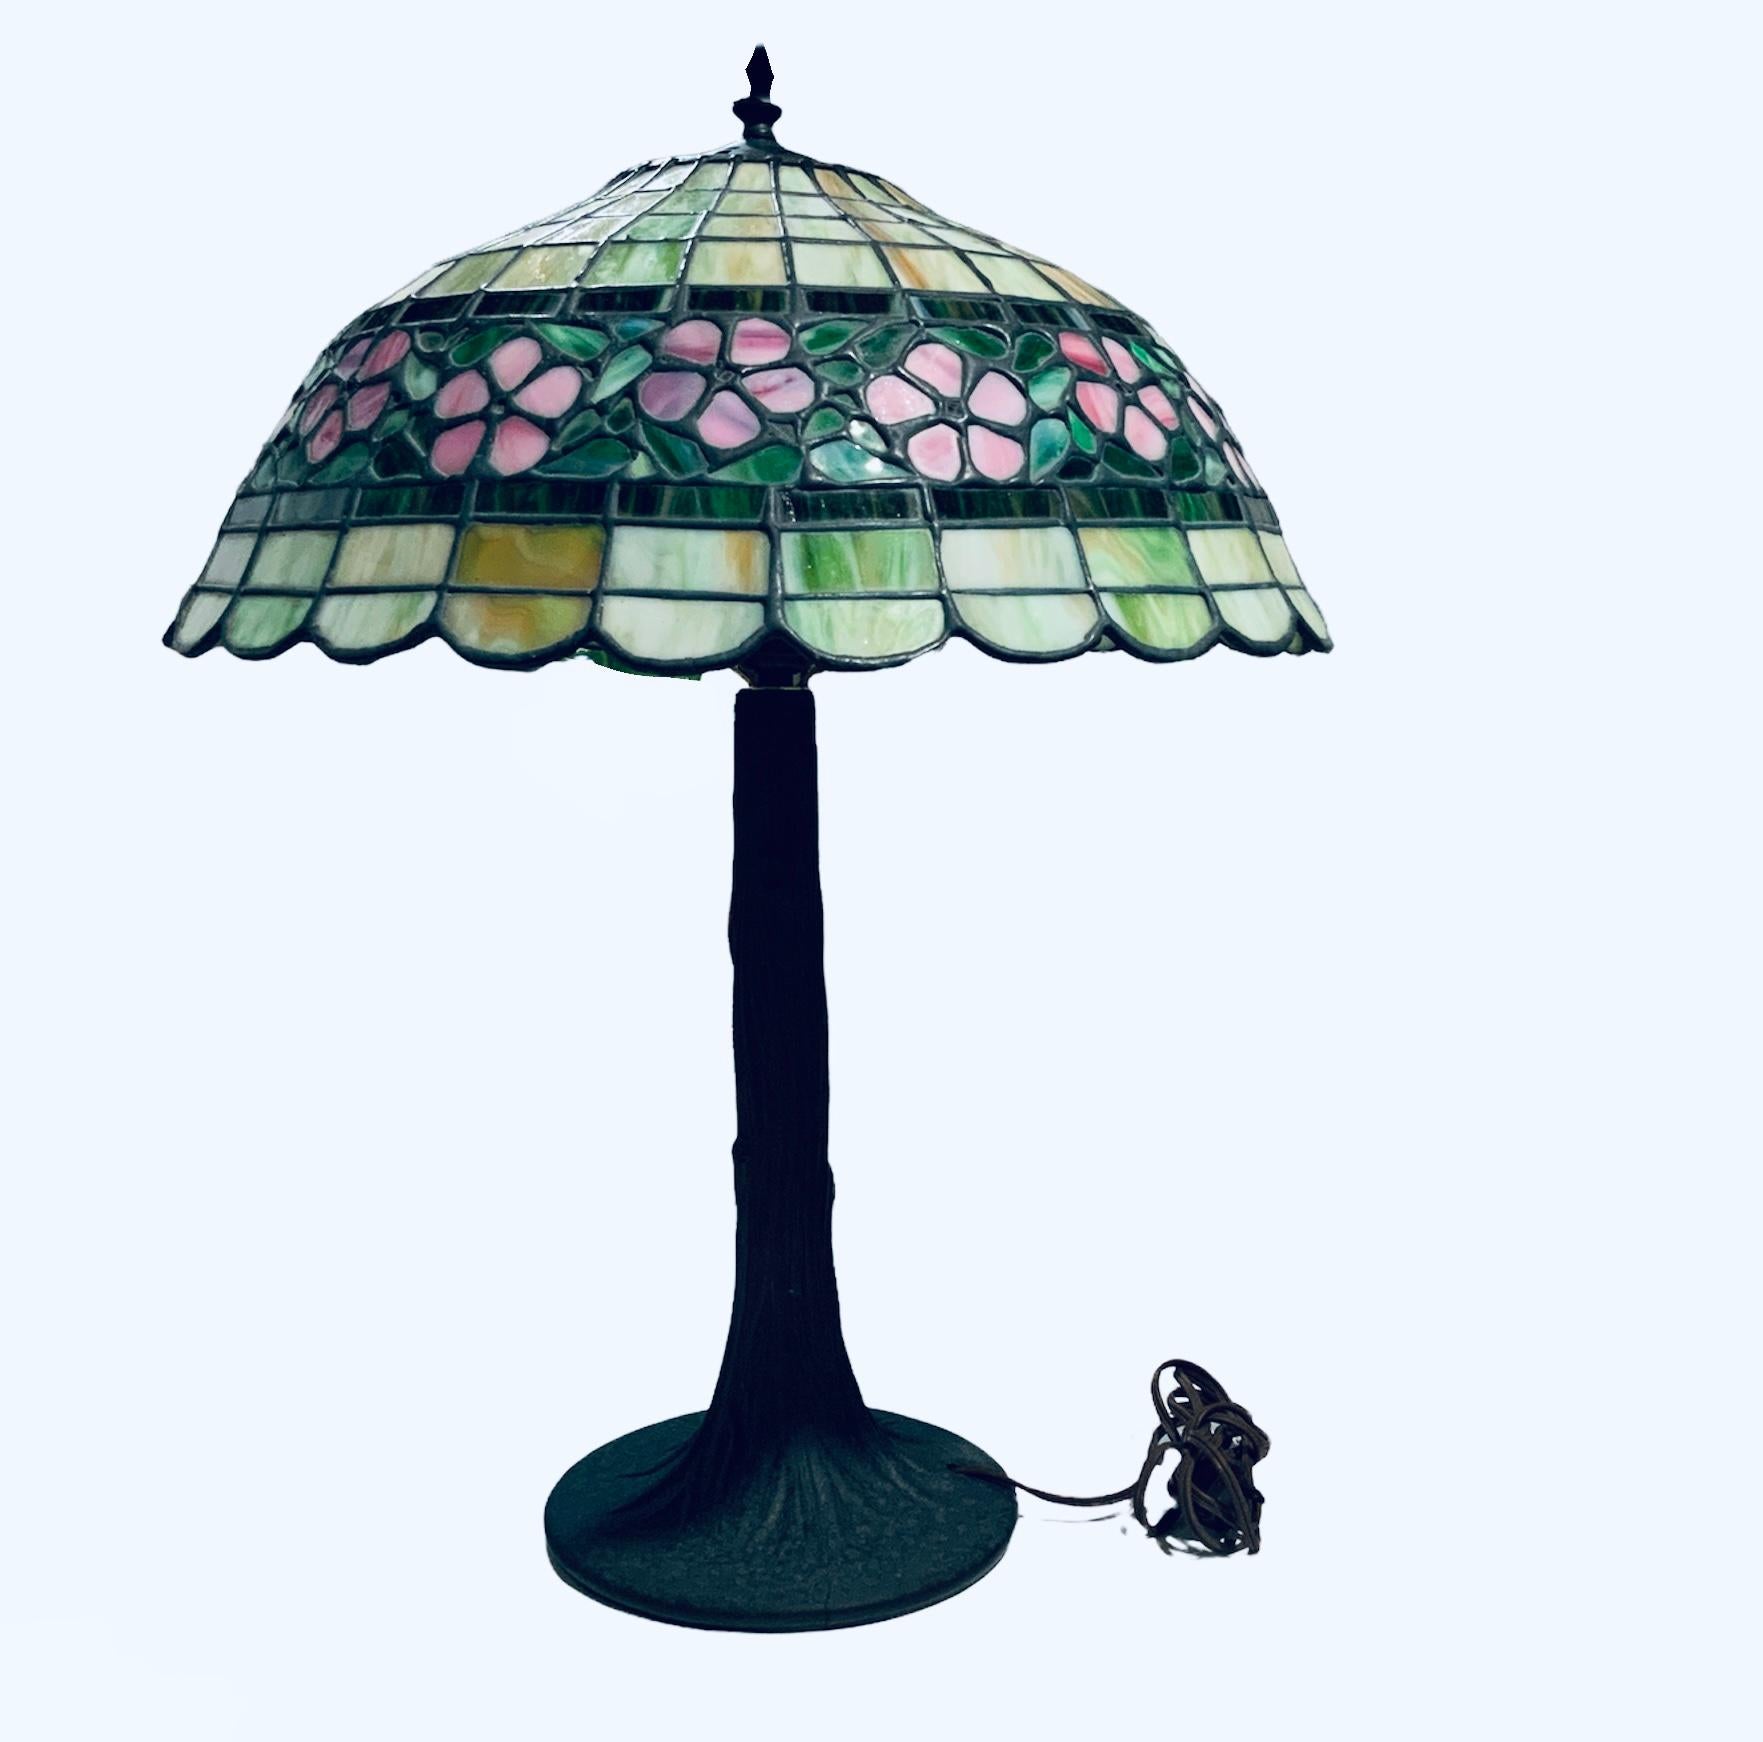 American Tiffany & Co. Style Table Lamp With Impatient Walleriana Flowers Design